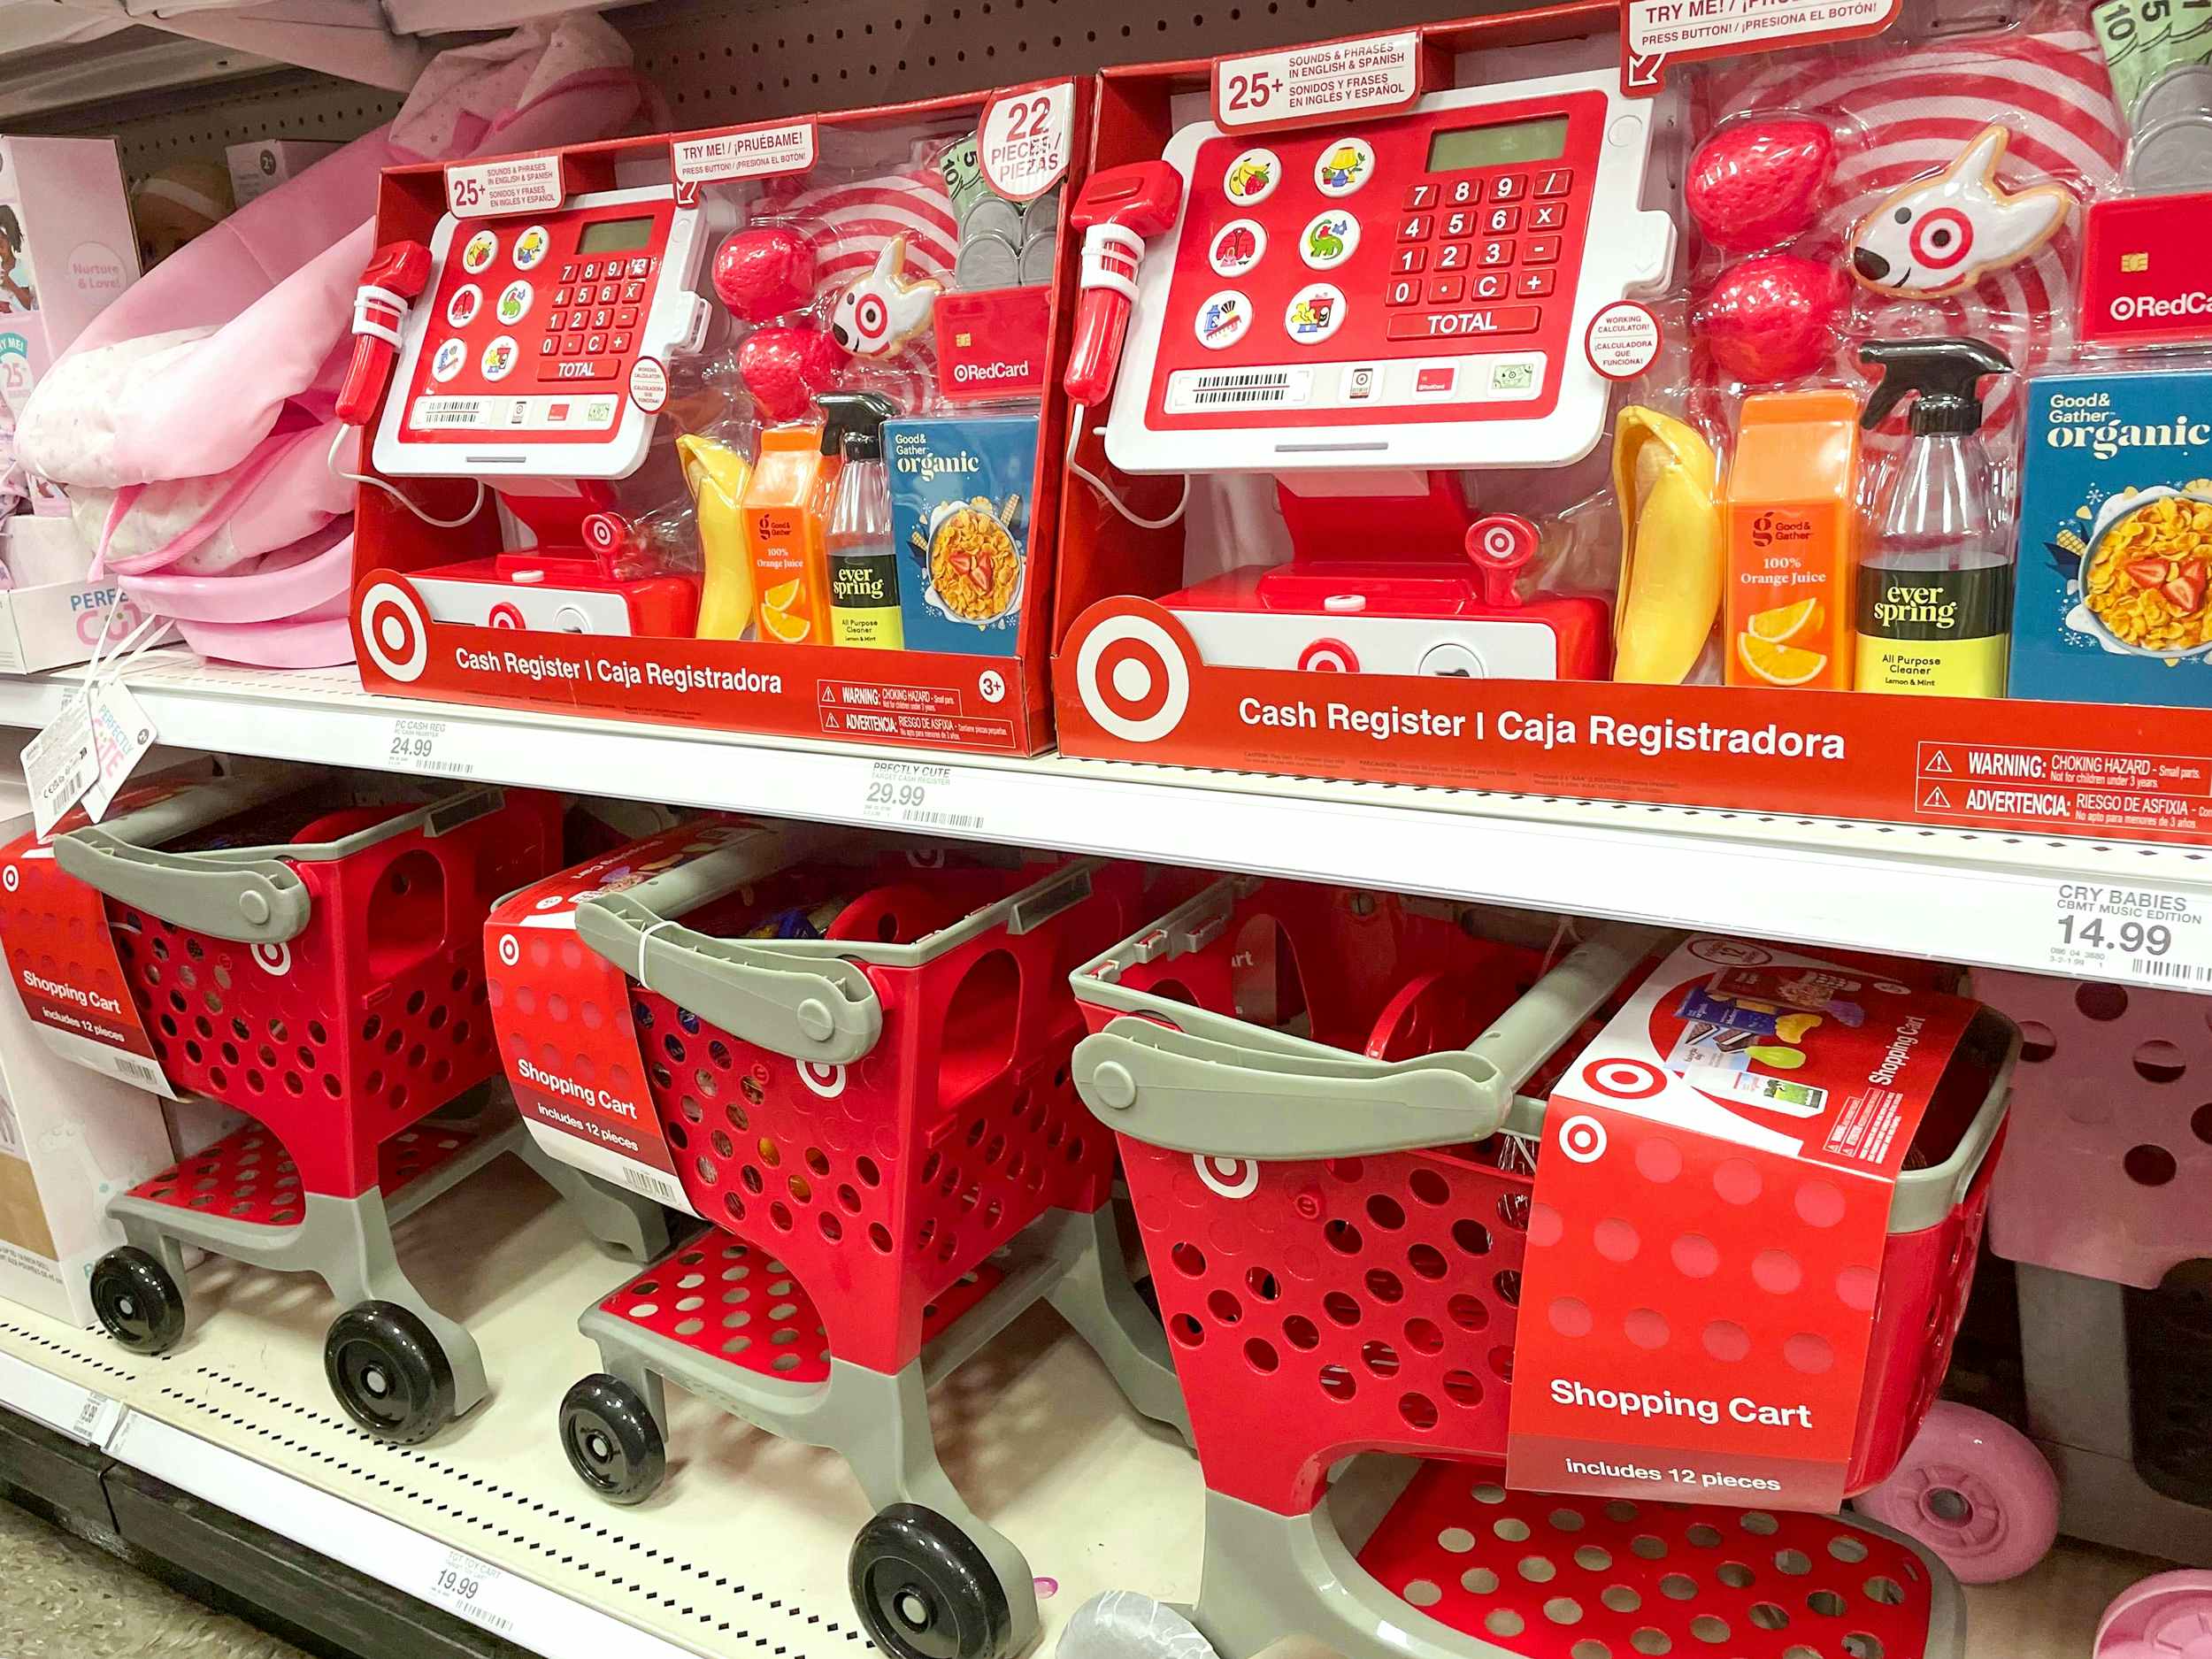 target cash registers and shopping cart toys on store shelves